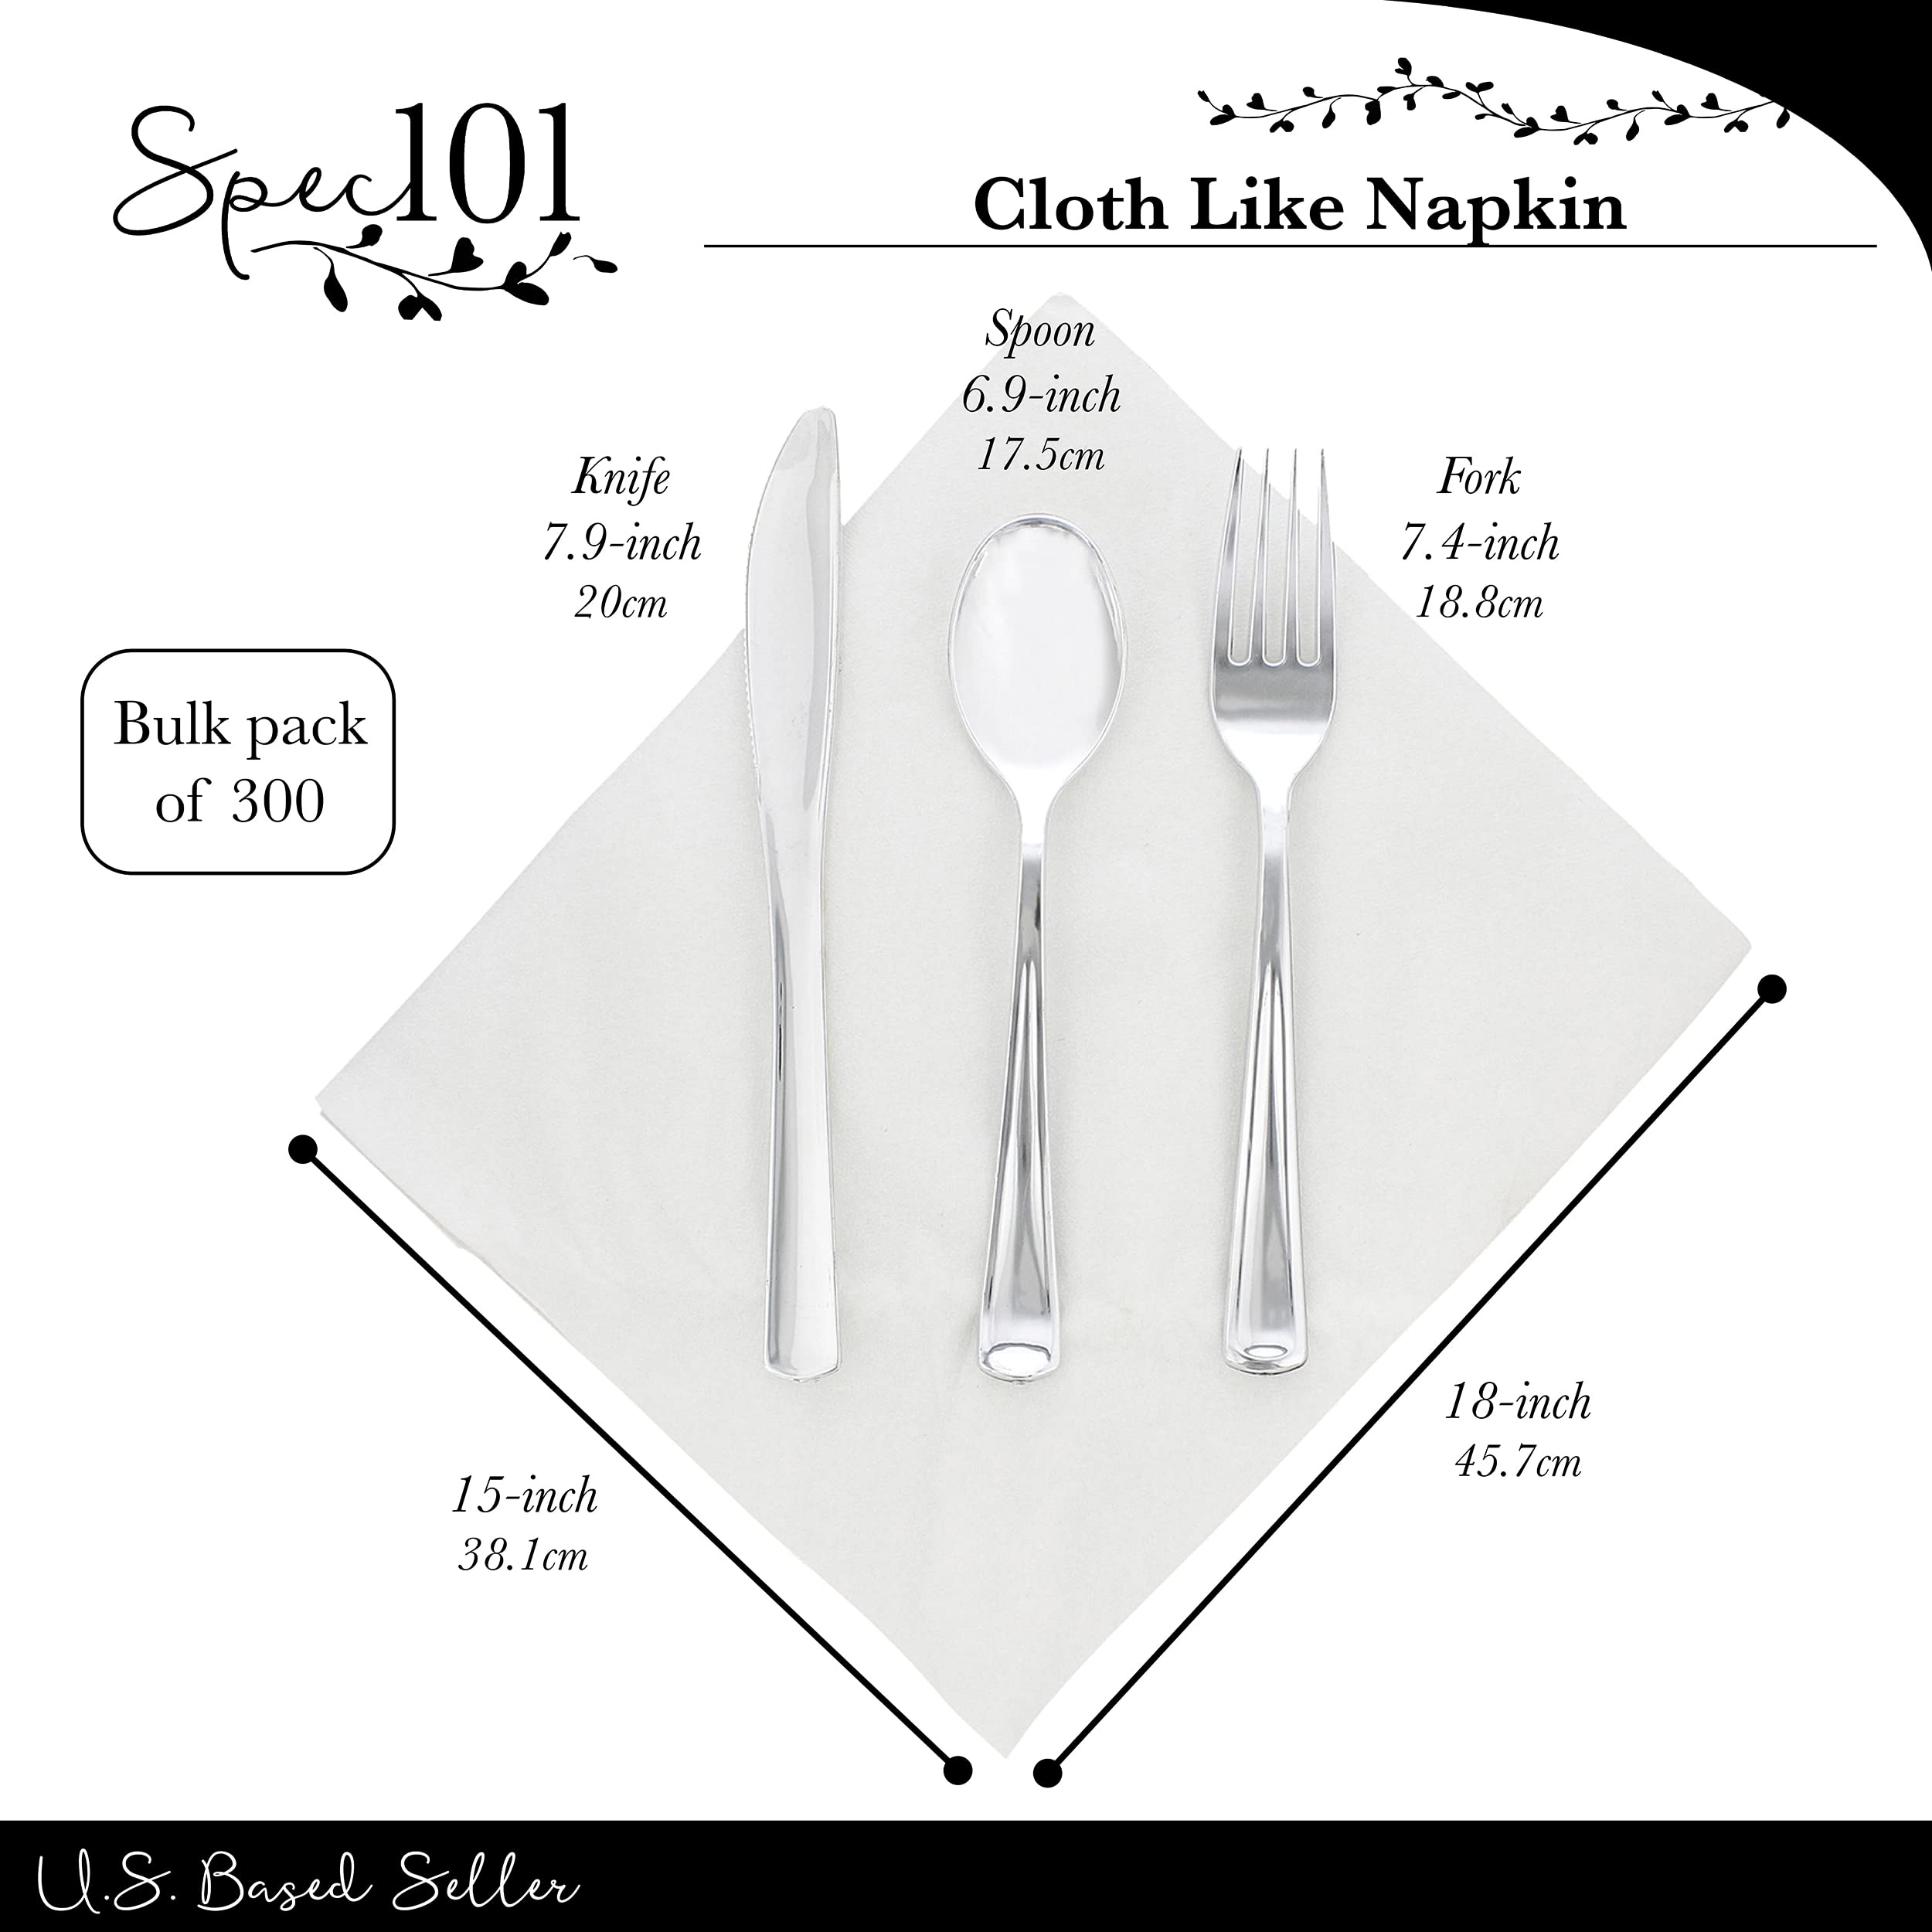 Spec101 Silver Plastic Silverware Sets for Parties Set of 300 - Pre Rolled Disposable Cutlery Individually Wrapped Plastic Utensils Set with Napkins for Weddings, Anniversaries, and Events